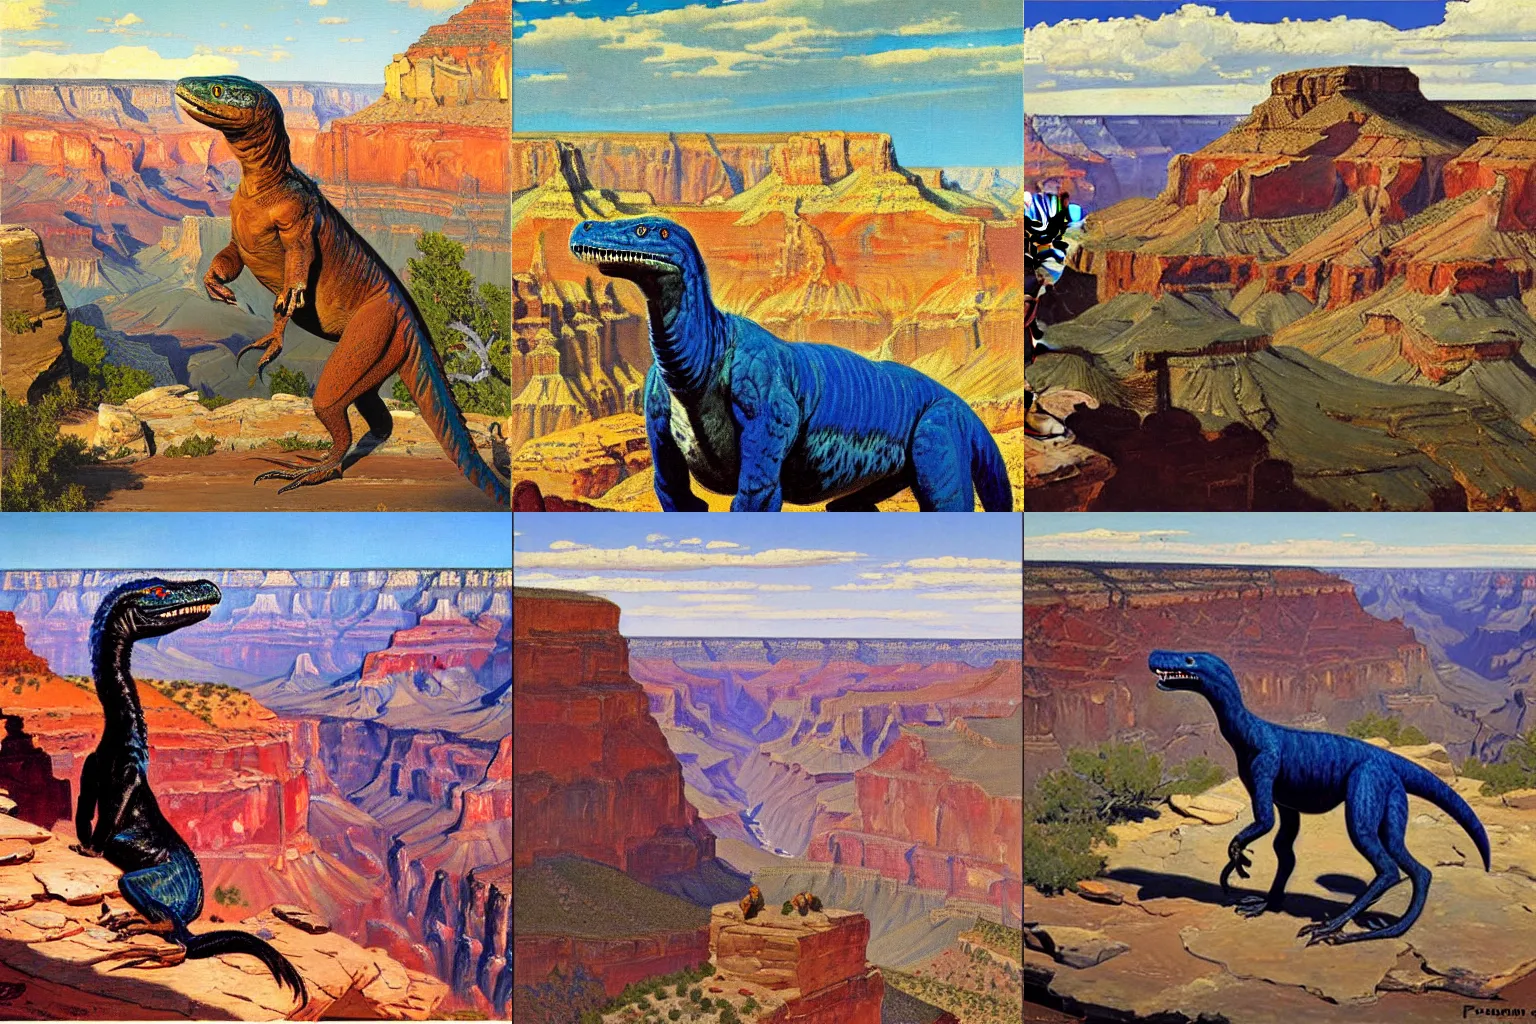 Prompt: A blue utahraptor in the grand canyon, oil painting by Frederic Remington